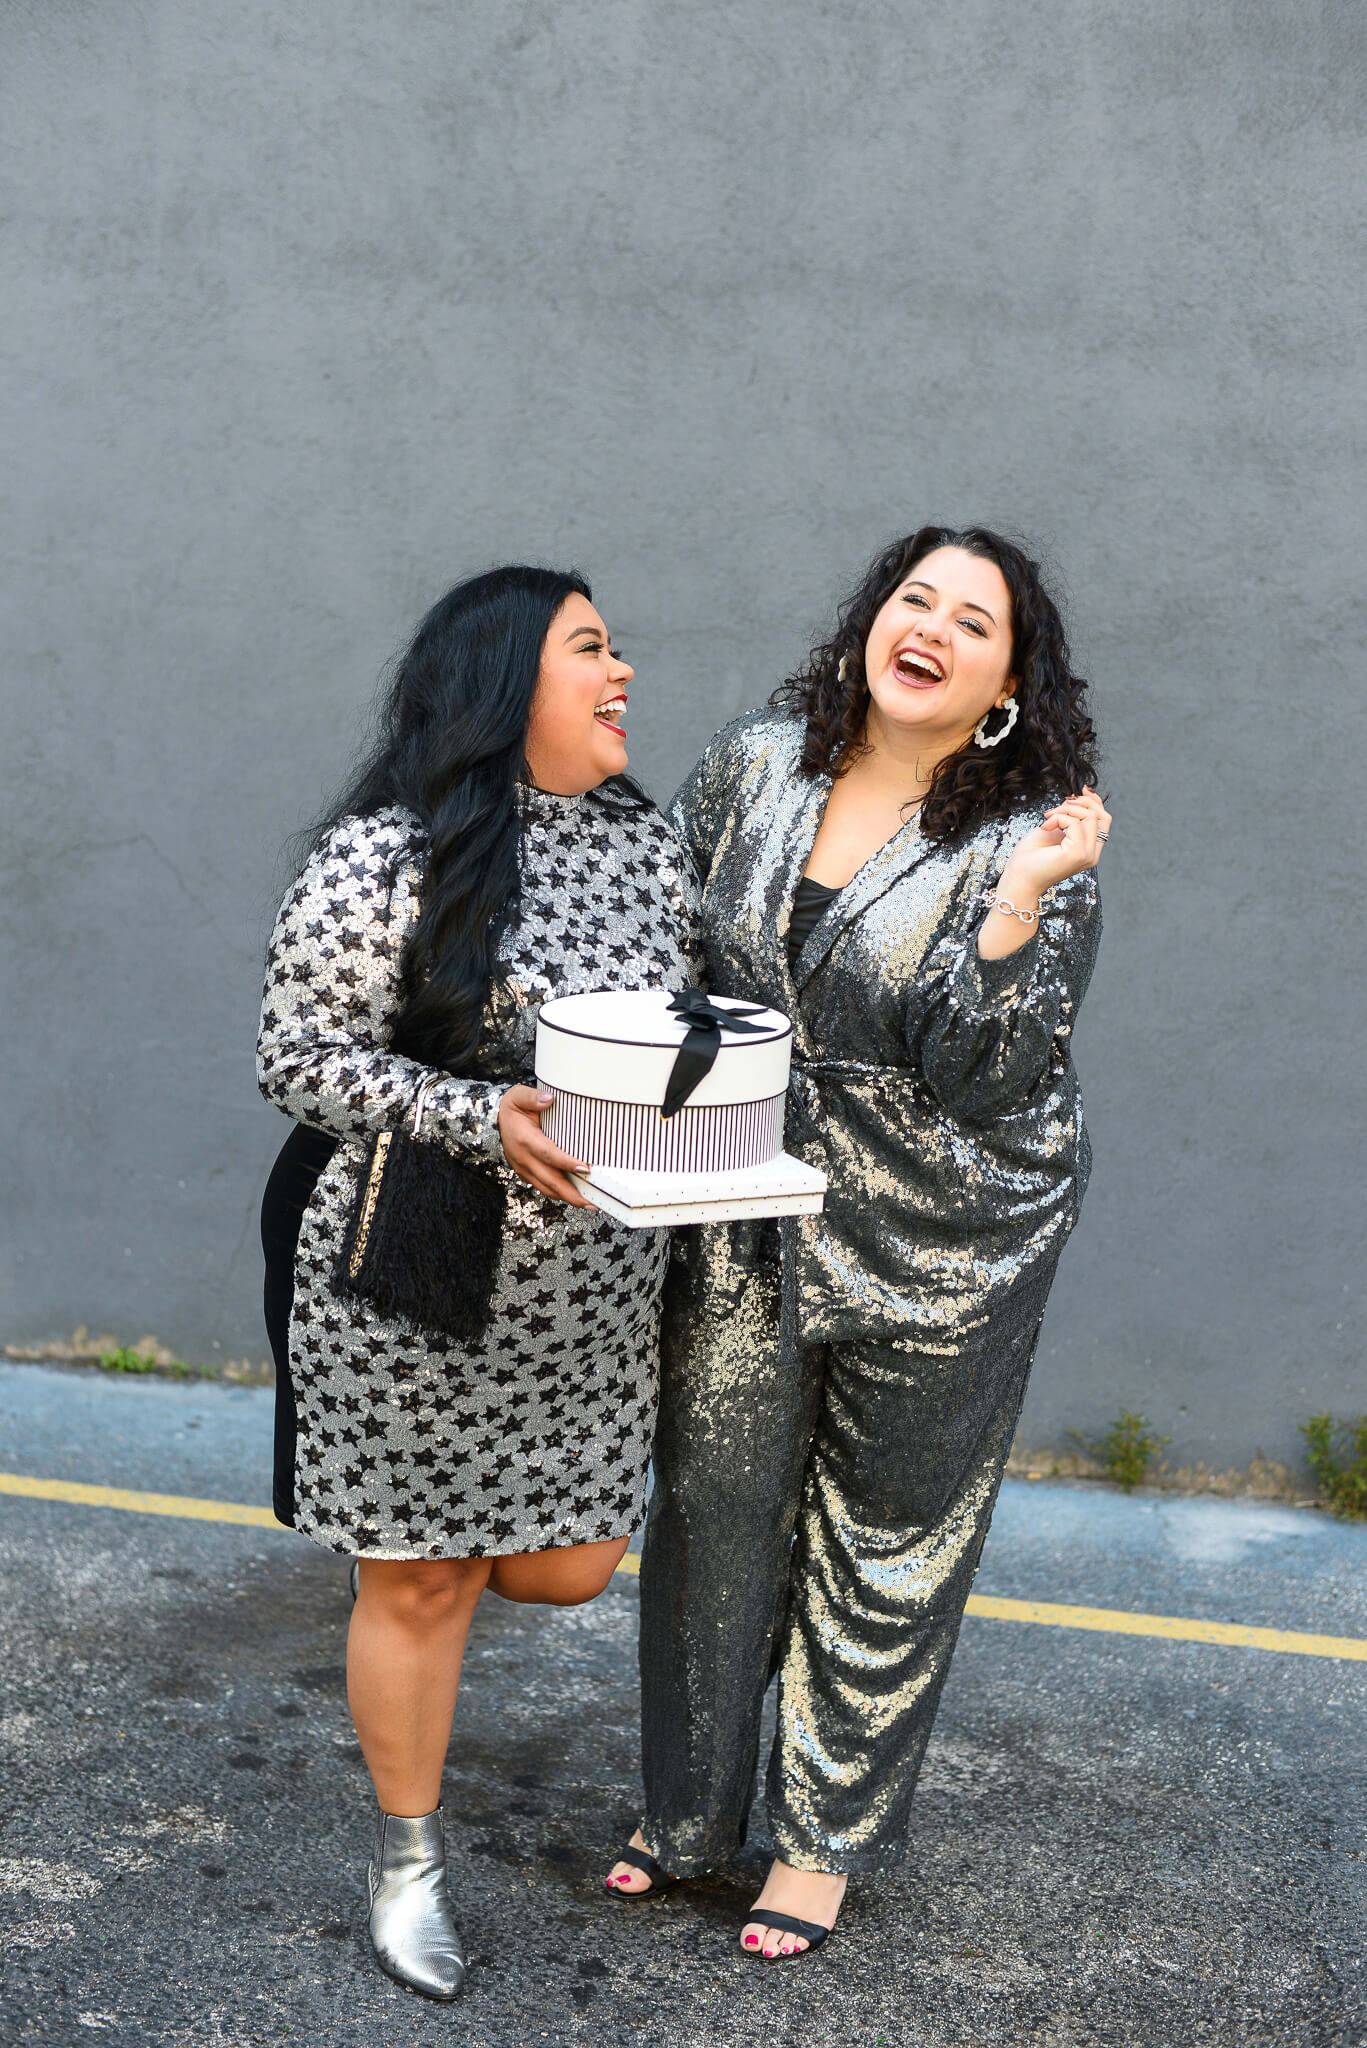 Laughing into the New Year with the perfect plus size outfit